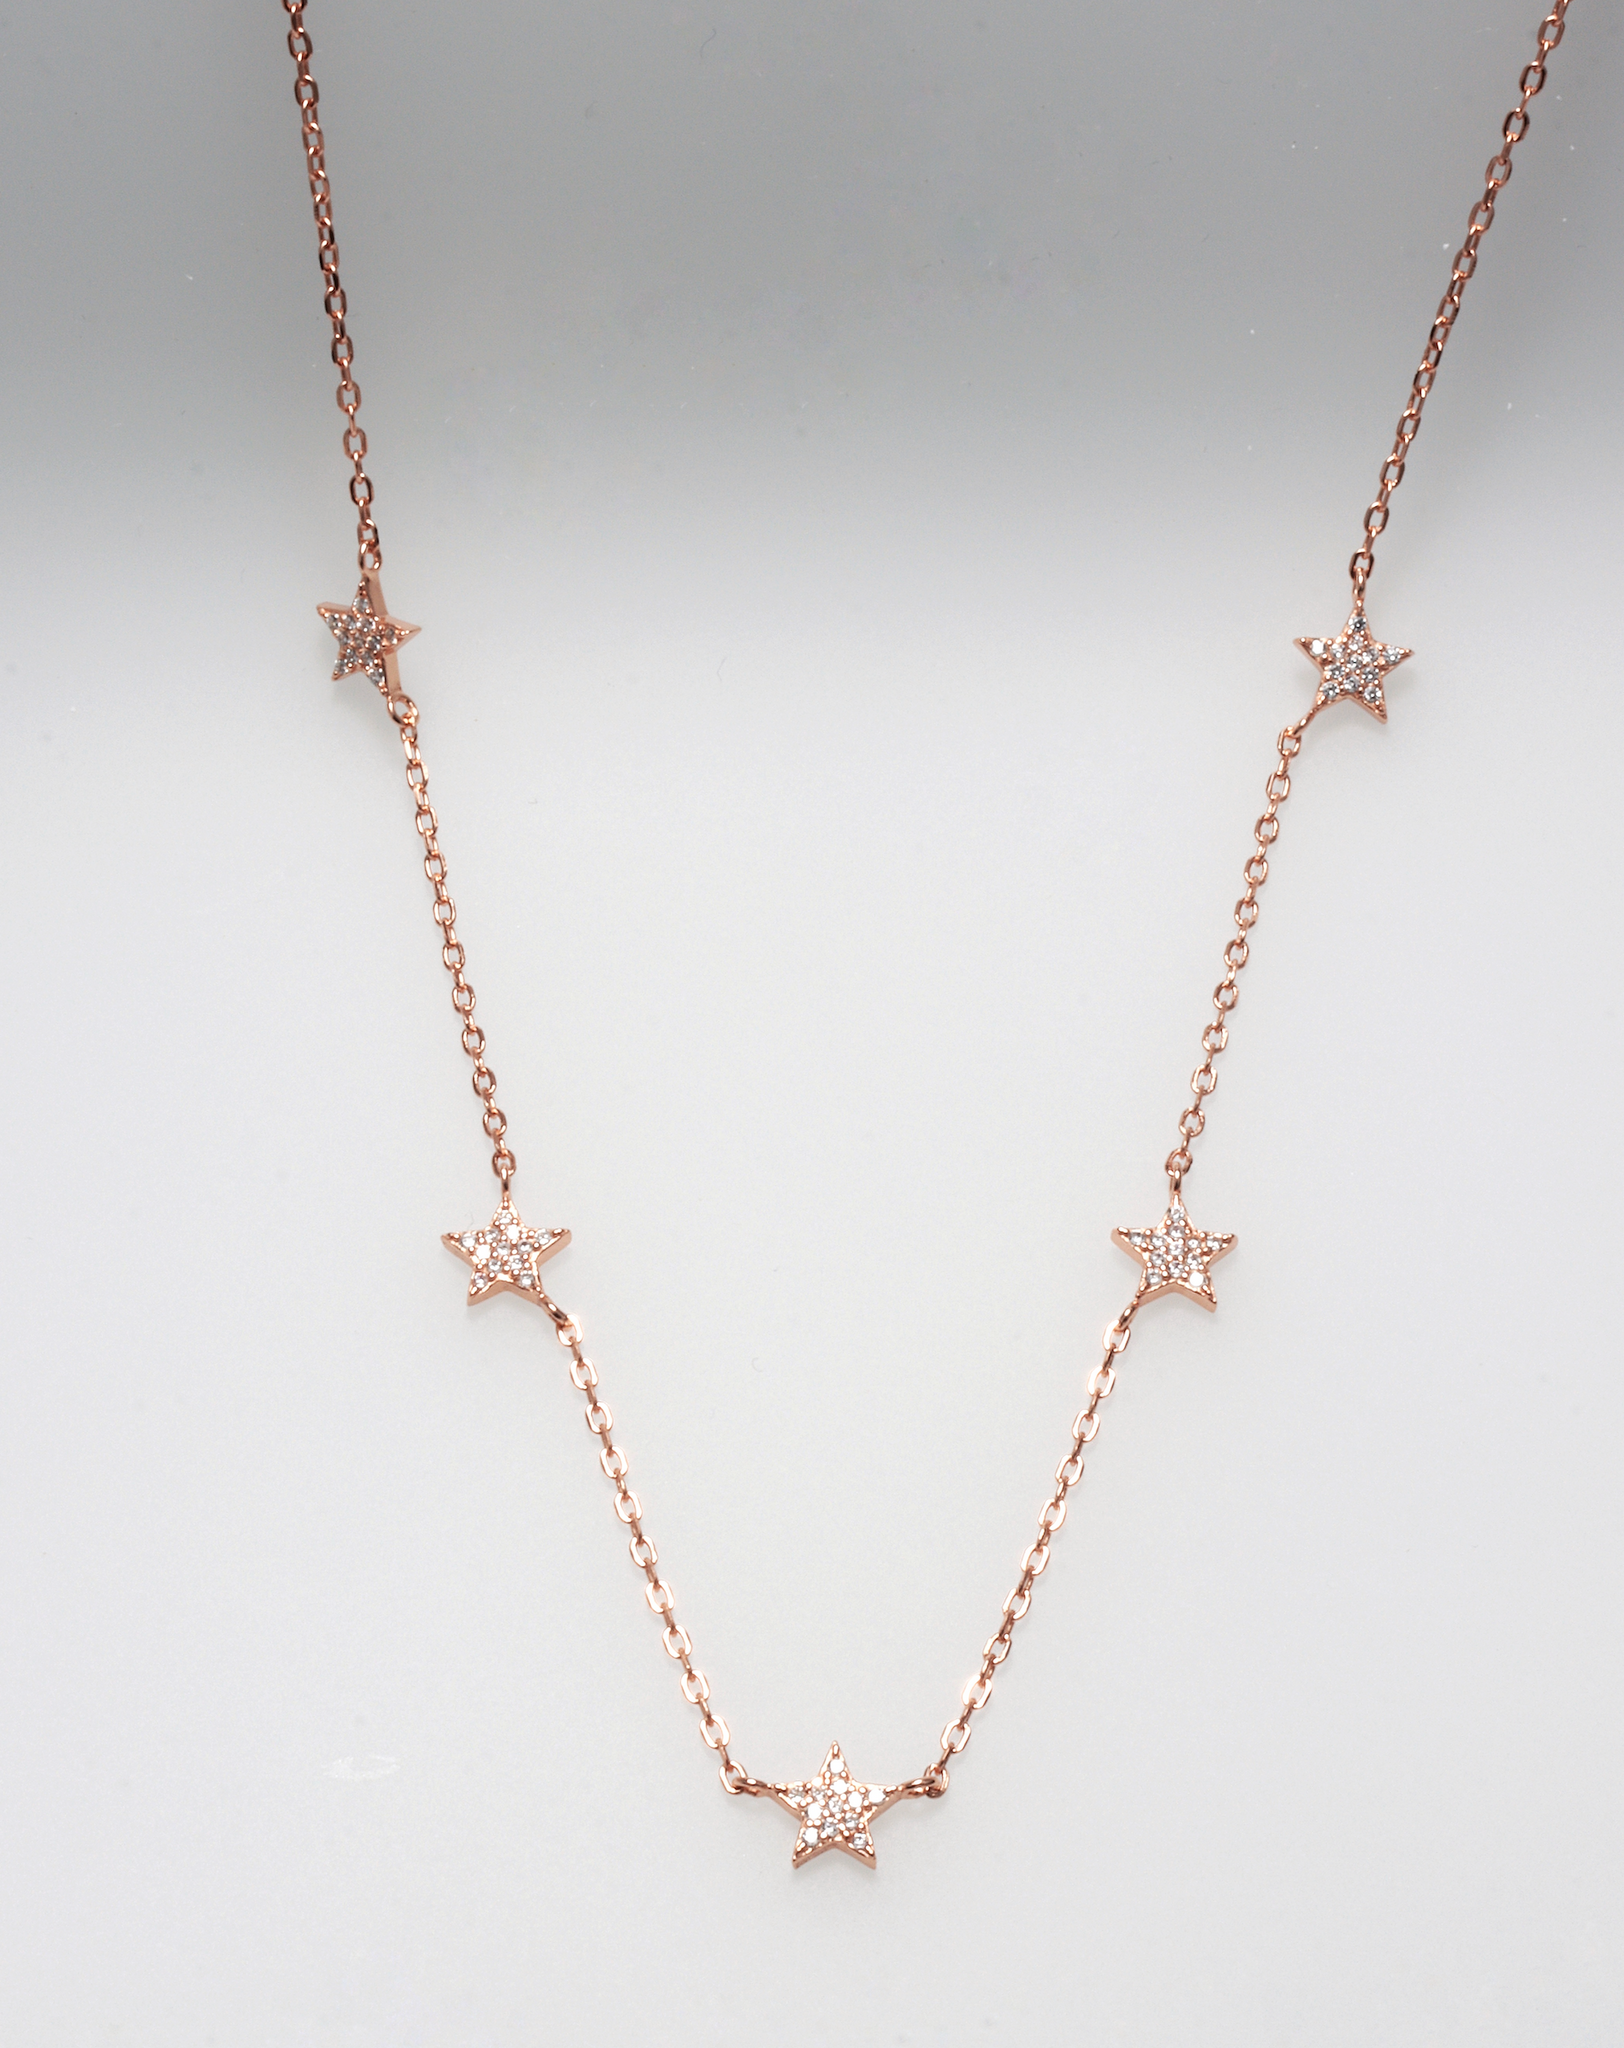 STAR ROSE GOLD NECKLACE 925 SILVER BY ANITA BRAND